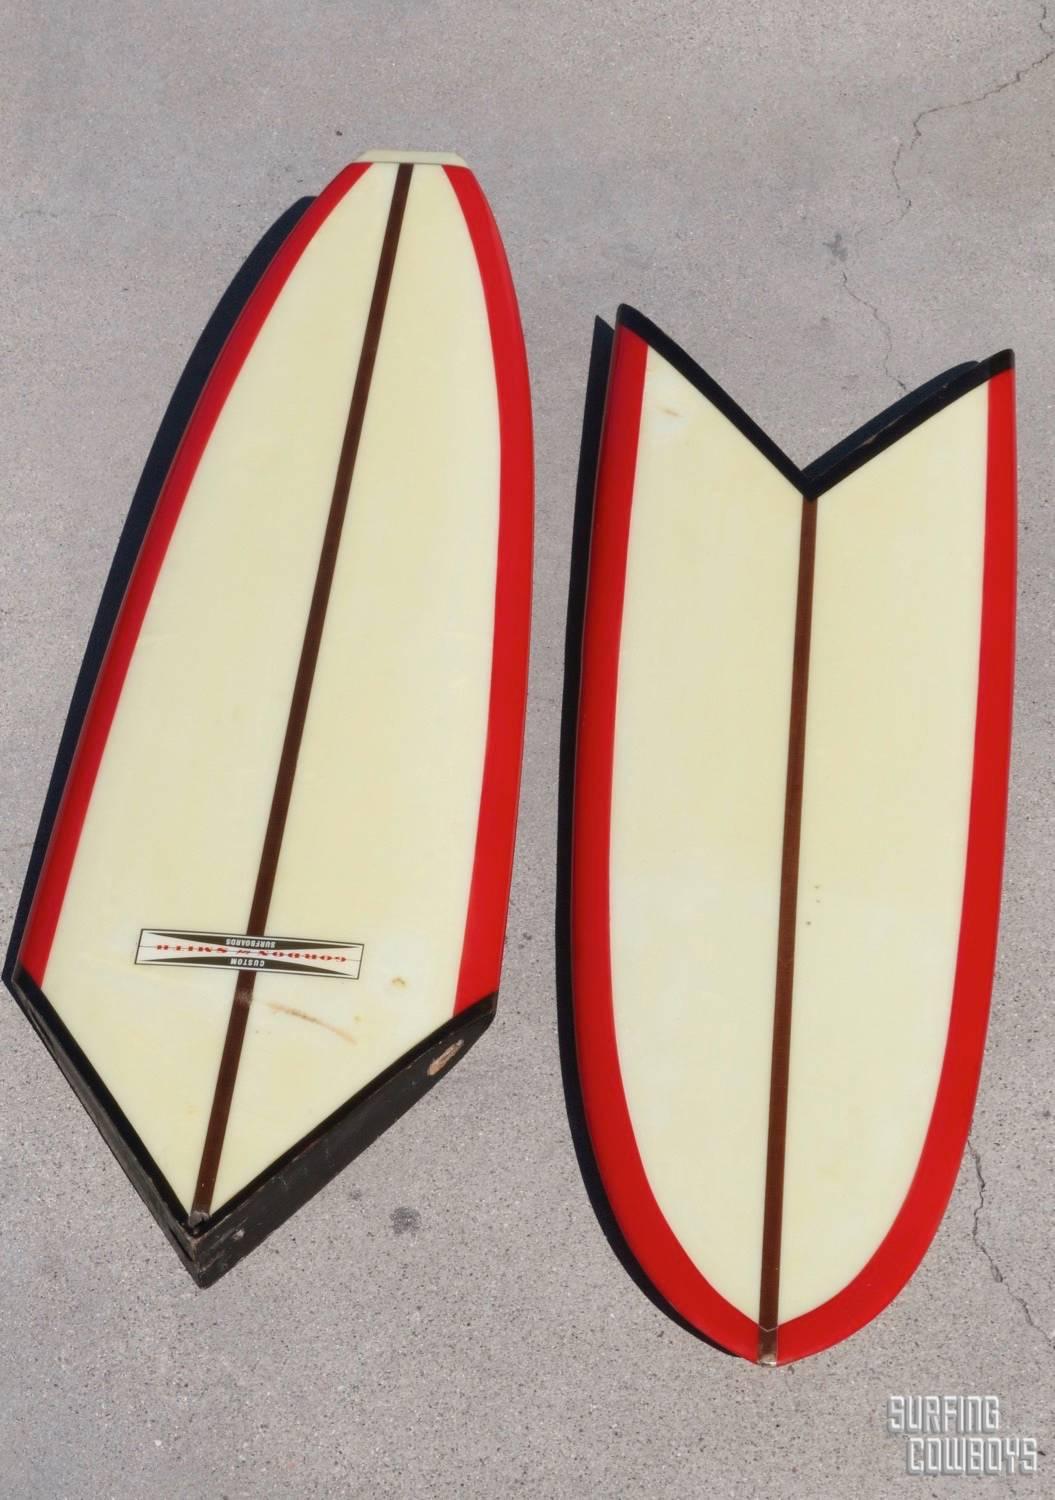 A Surfboard that is sculptural, colorful and packed with history.  This bisect board was the brainchild of Herman Bank, a Jet Propulsion Rocket Boy engineer who called his creation The Multiboard, a term that was quickly usurped by popular reference